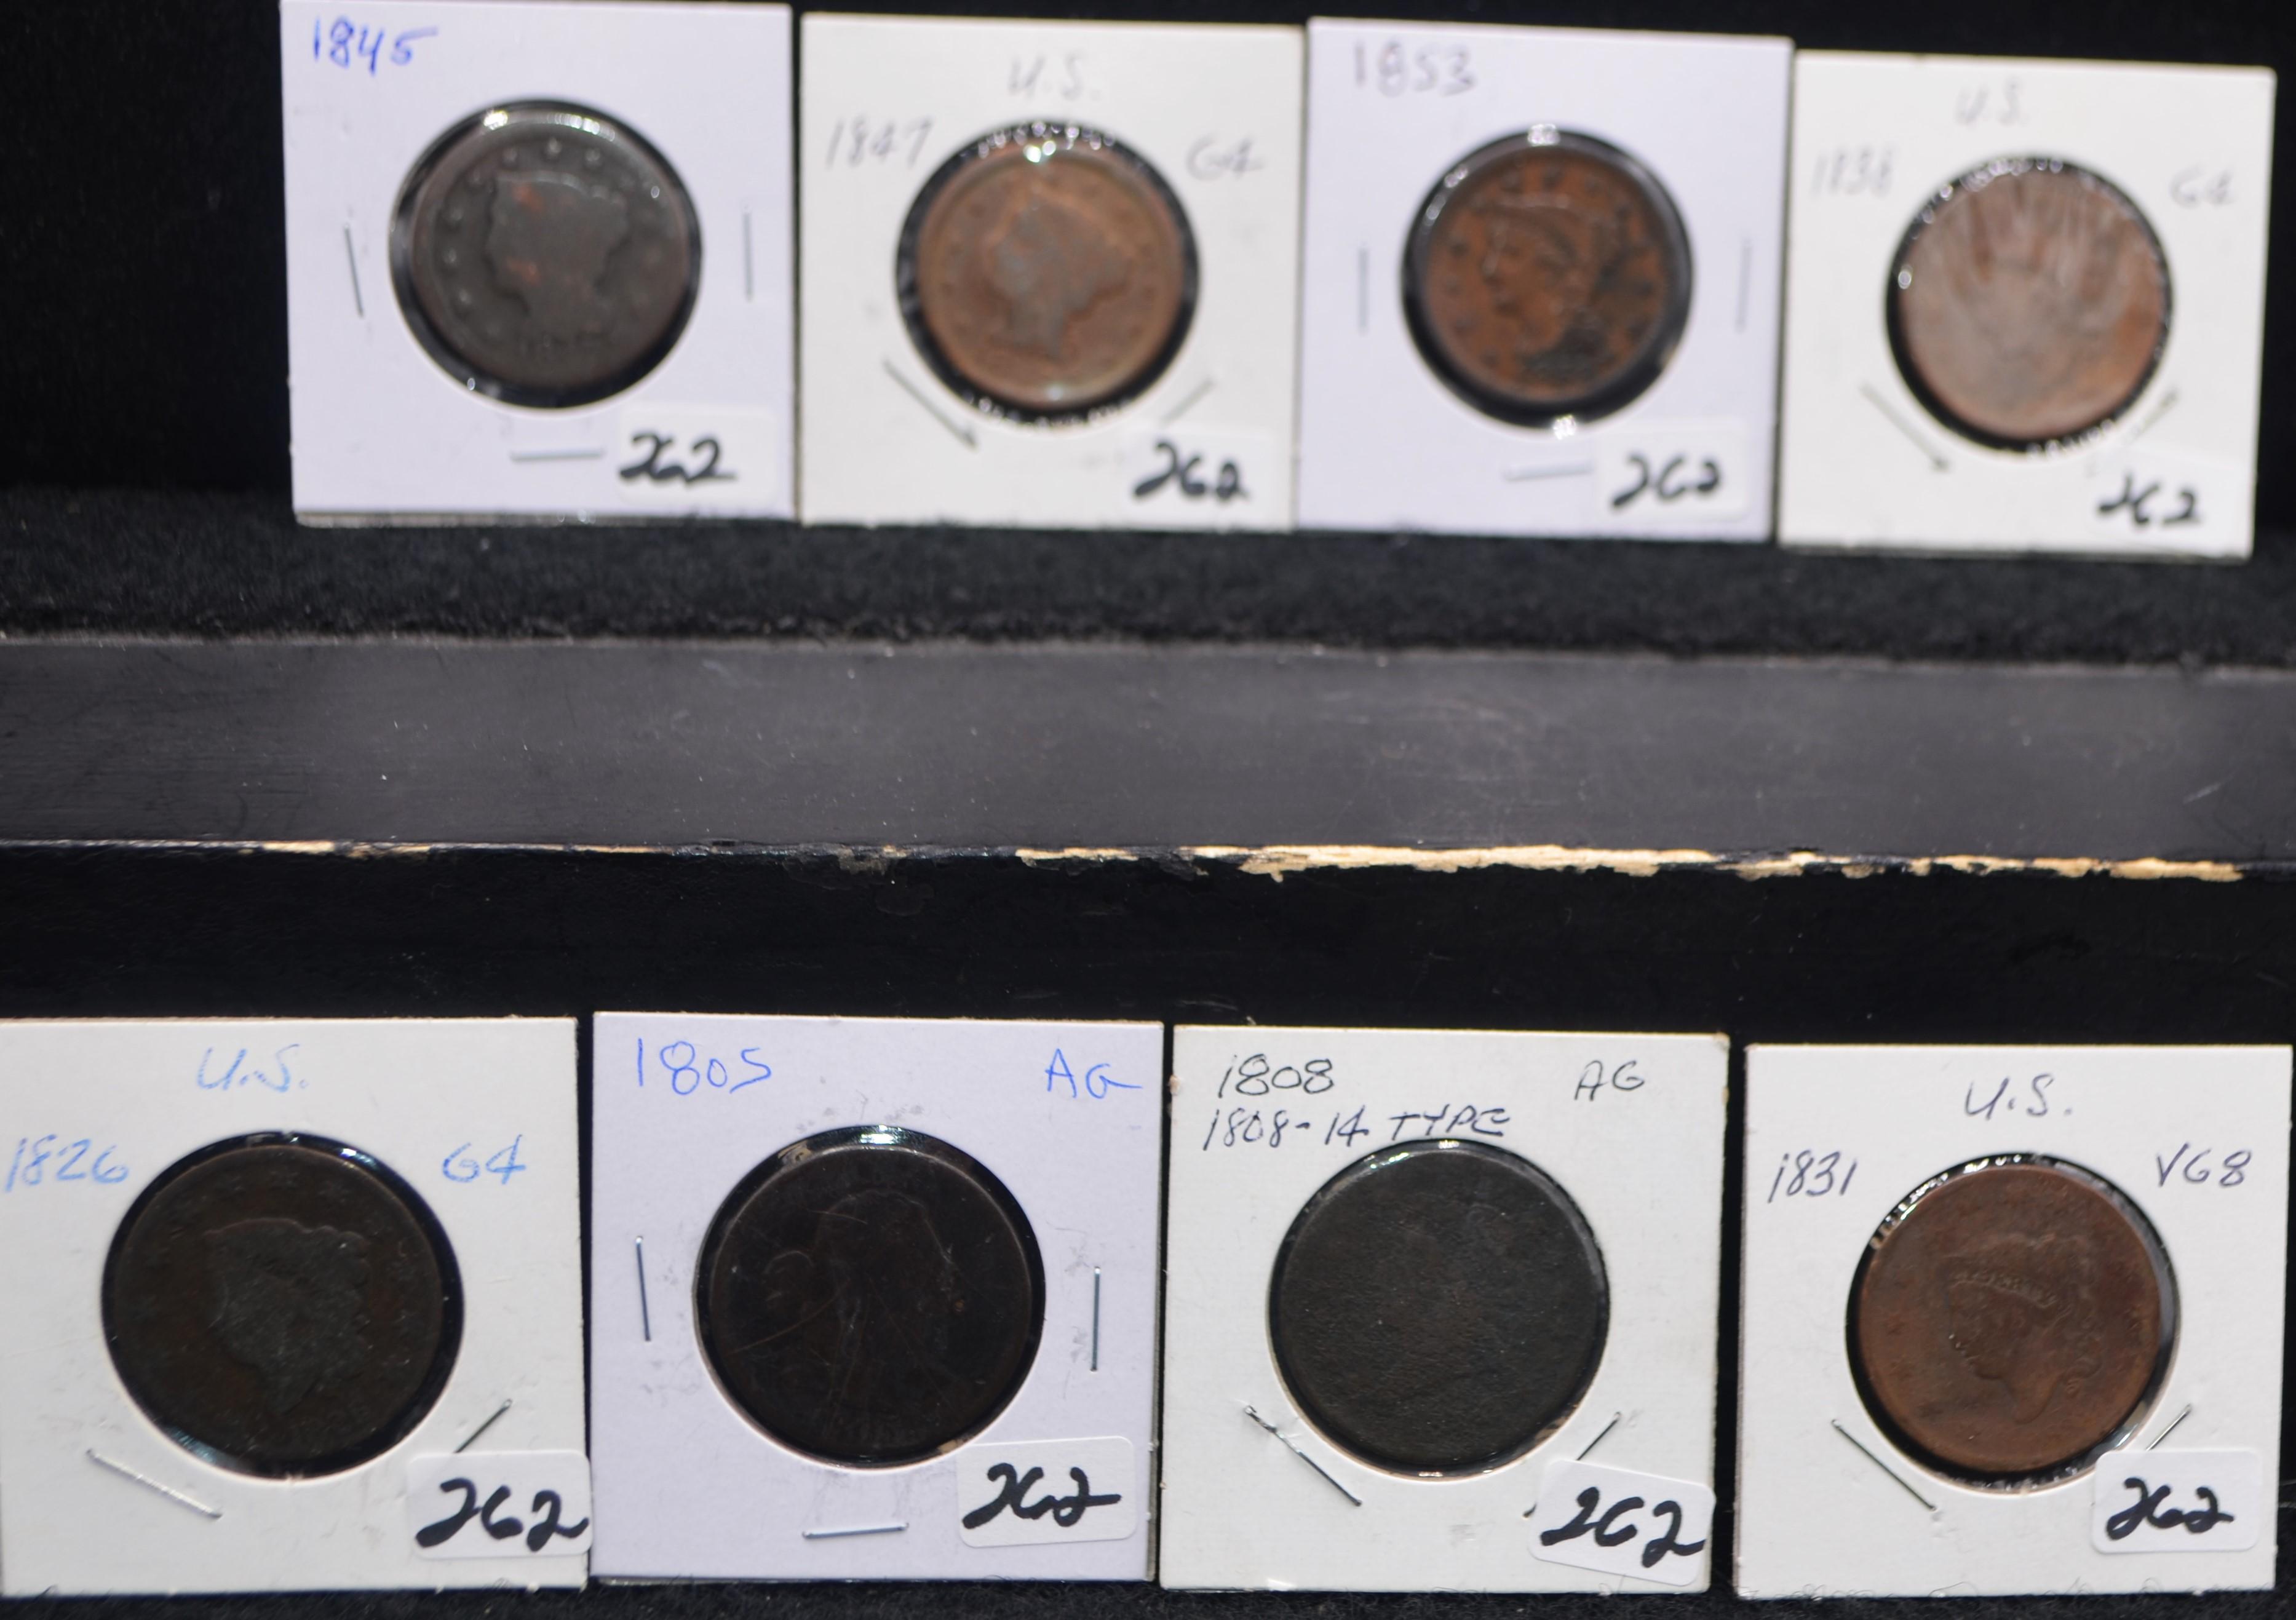 8 MIXED DATE LARGE CENTS